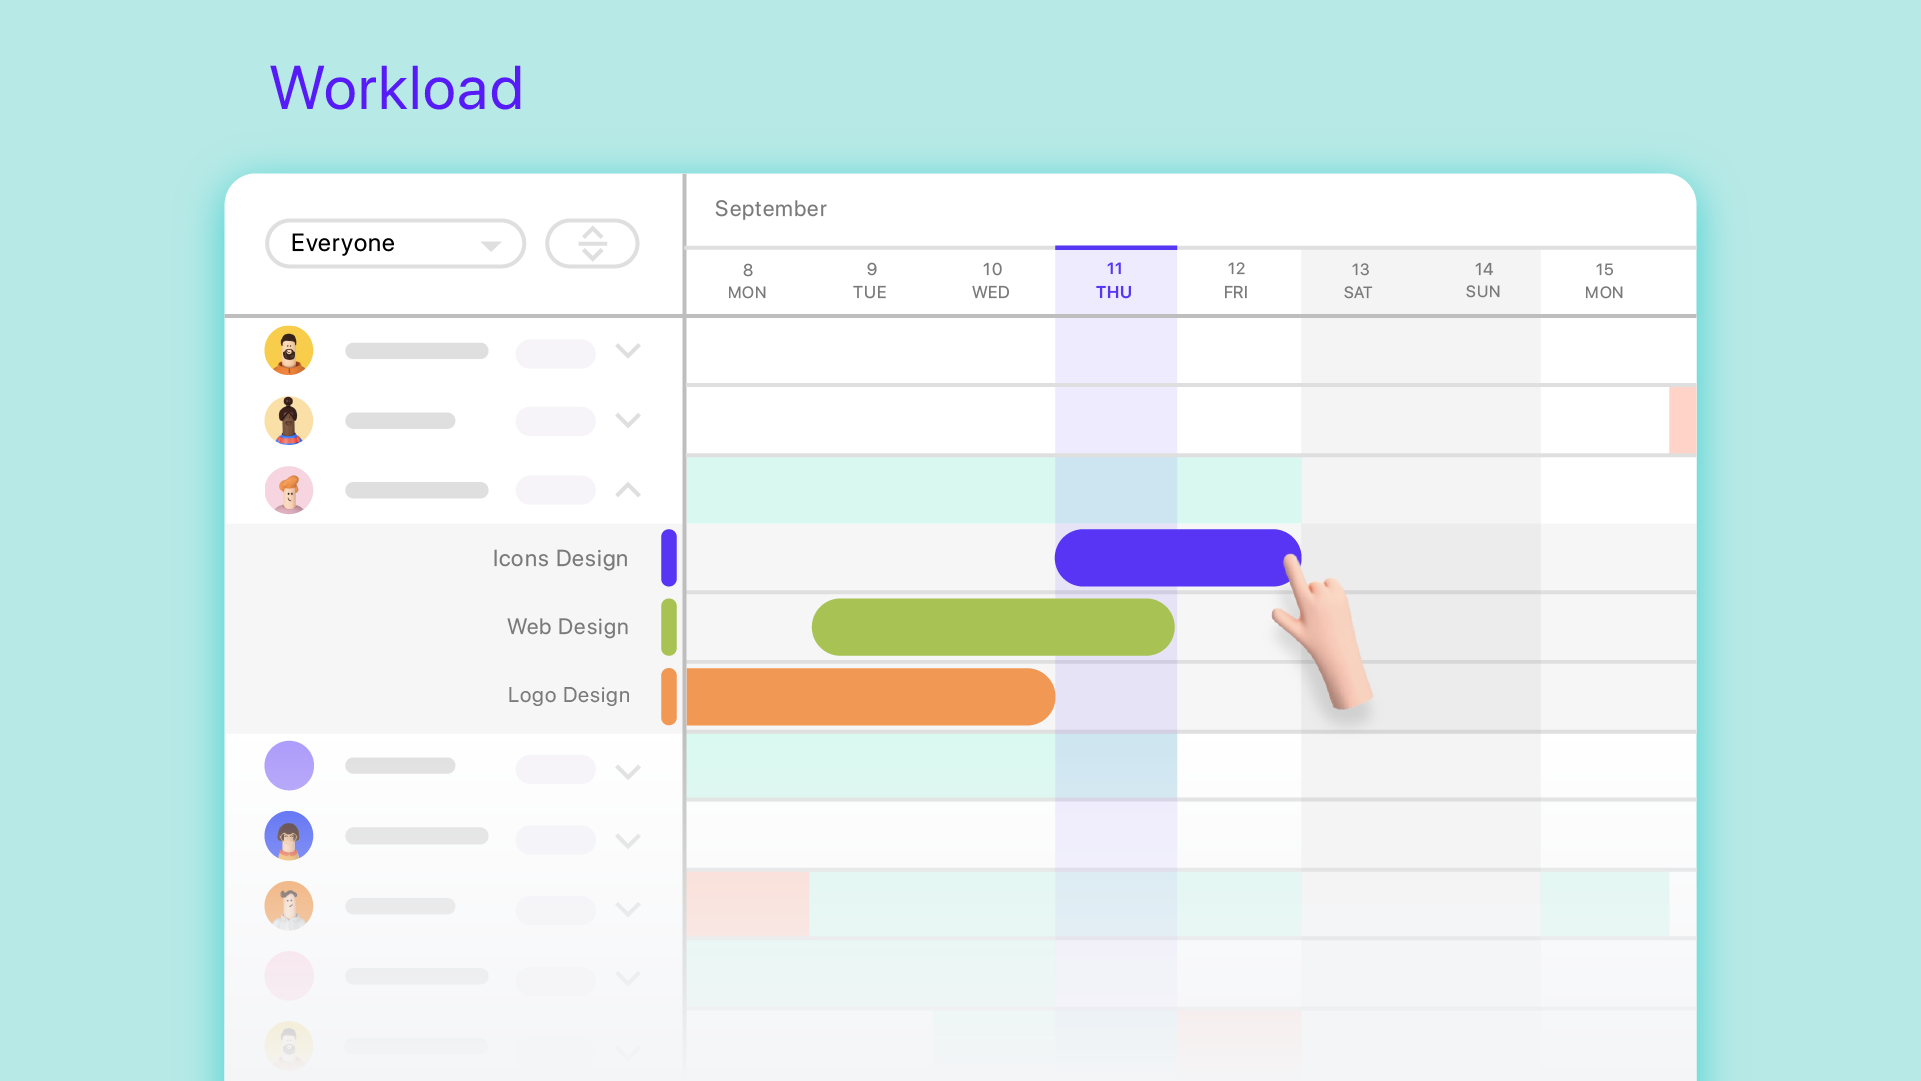 ActiveCollab Workload is a visual resource management tool built for agencies and creative professionals